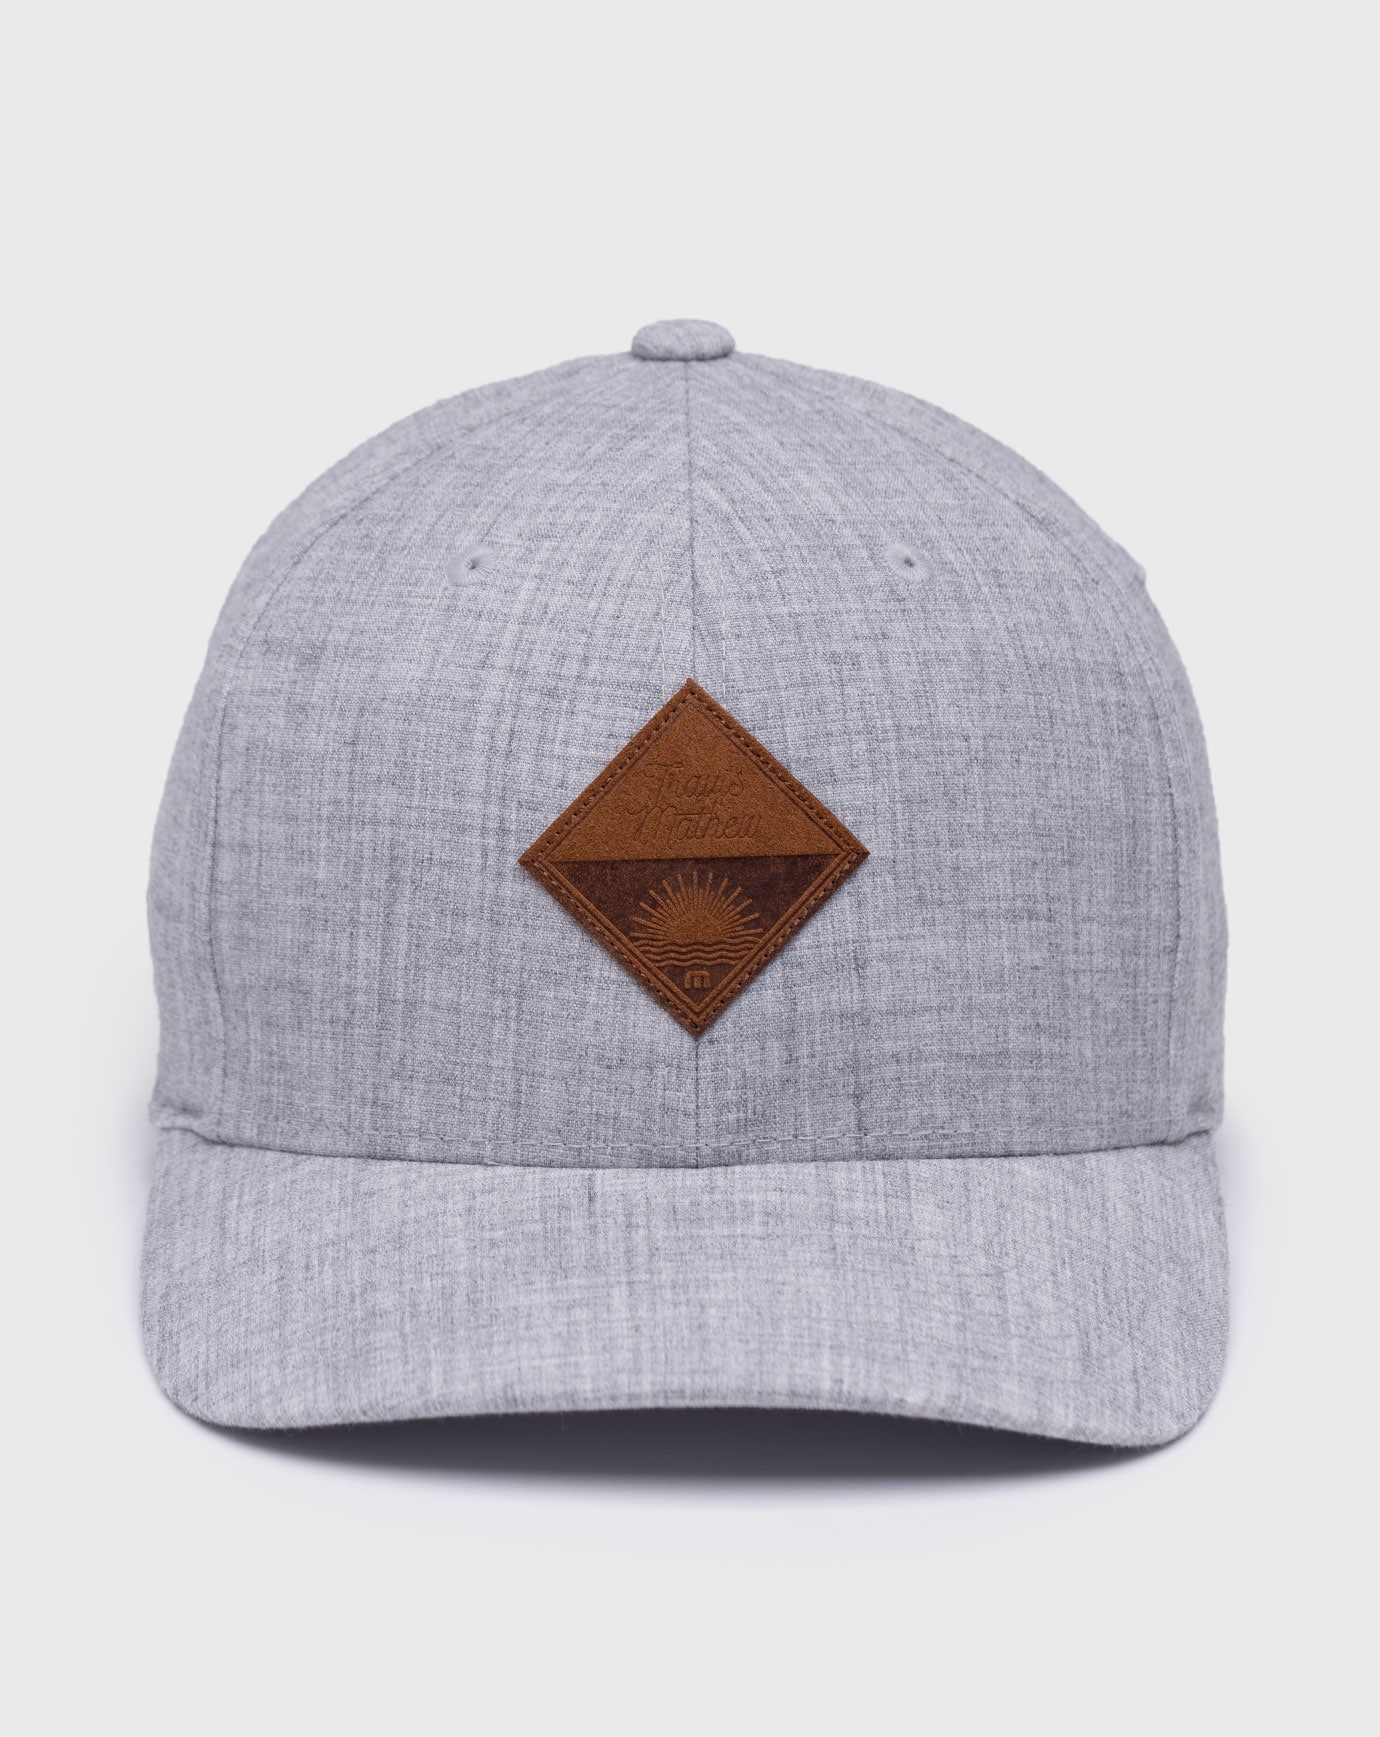 QUIET COVE FITTED HAT